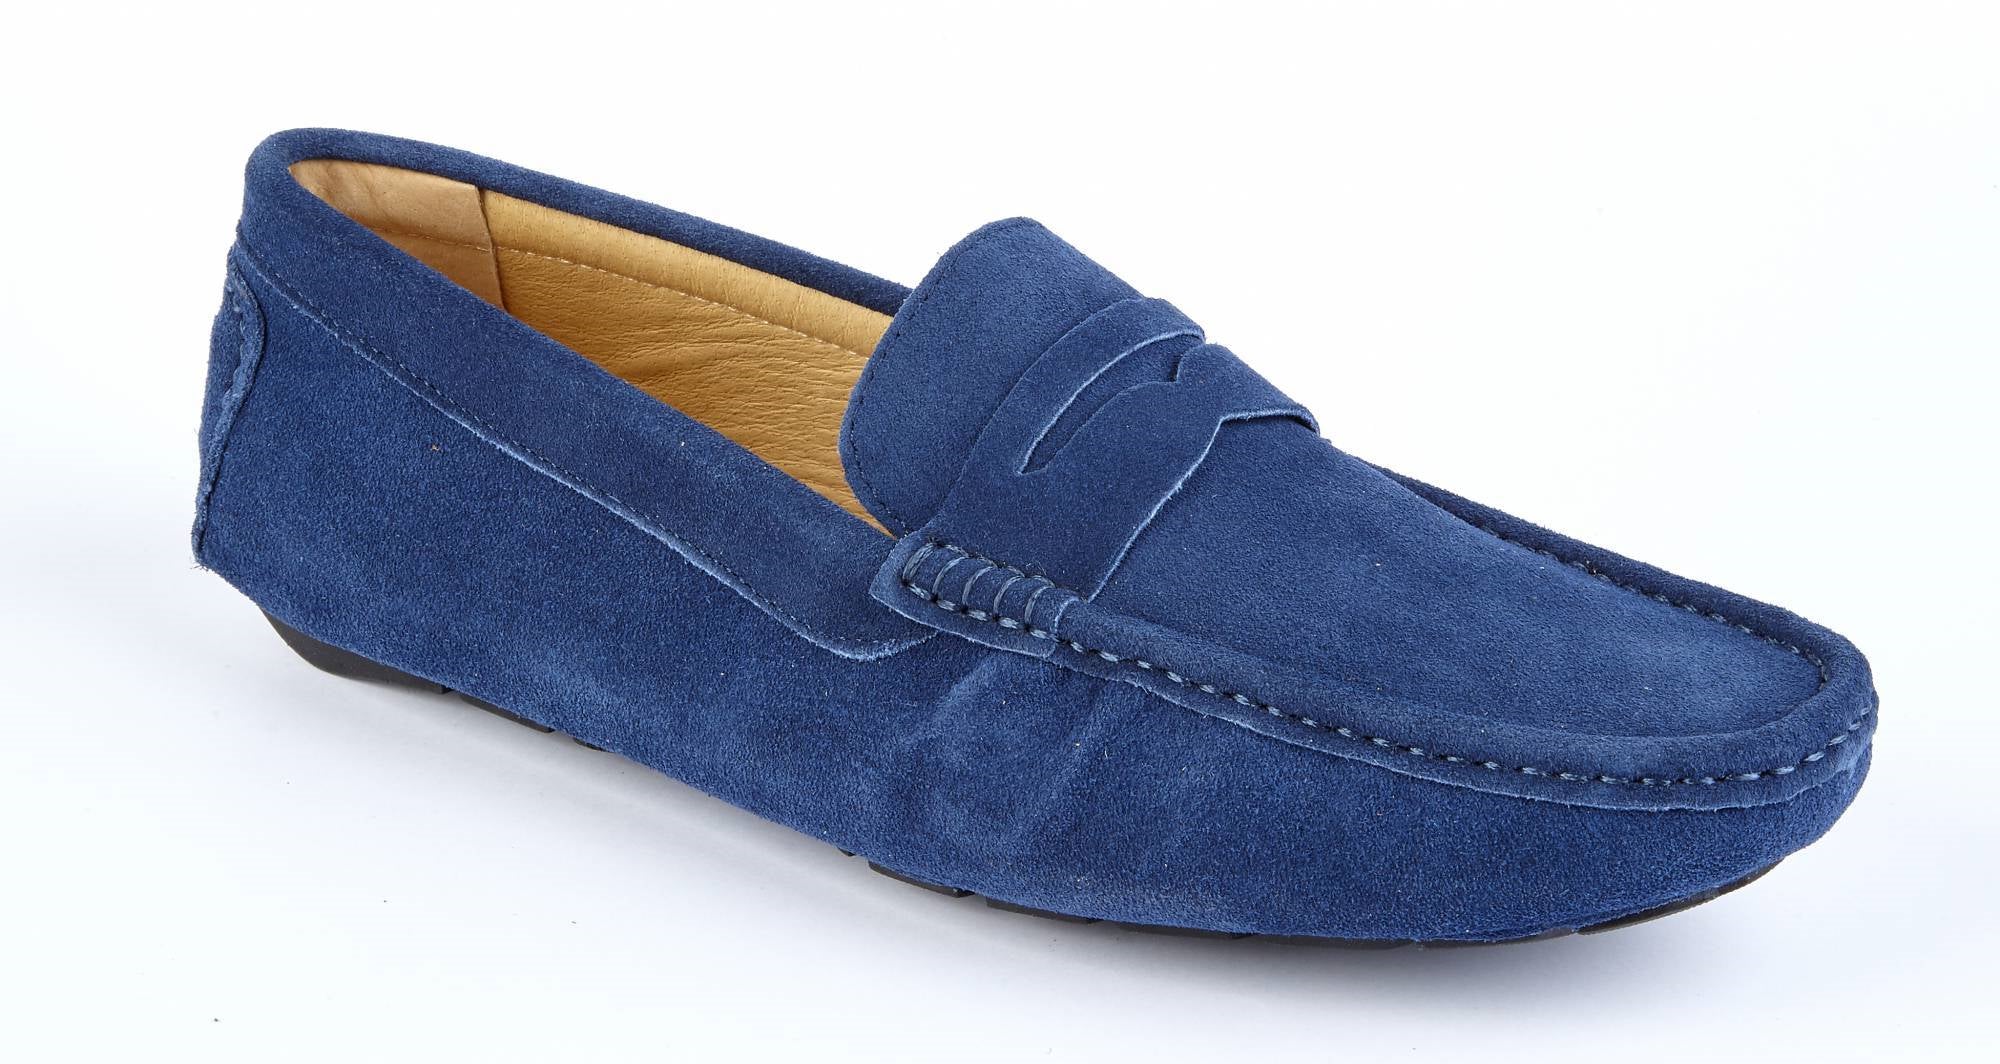 Mens Navy Blue & Red Suede Driving Loafers – Bold Society